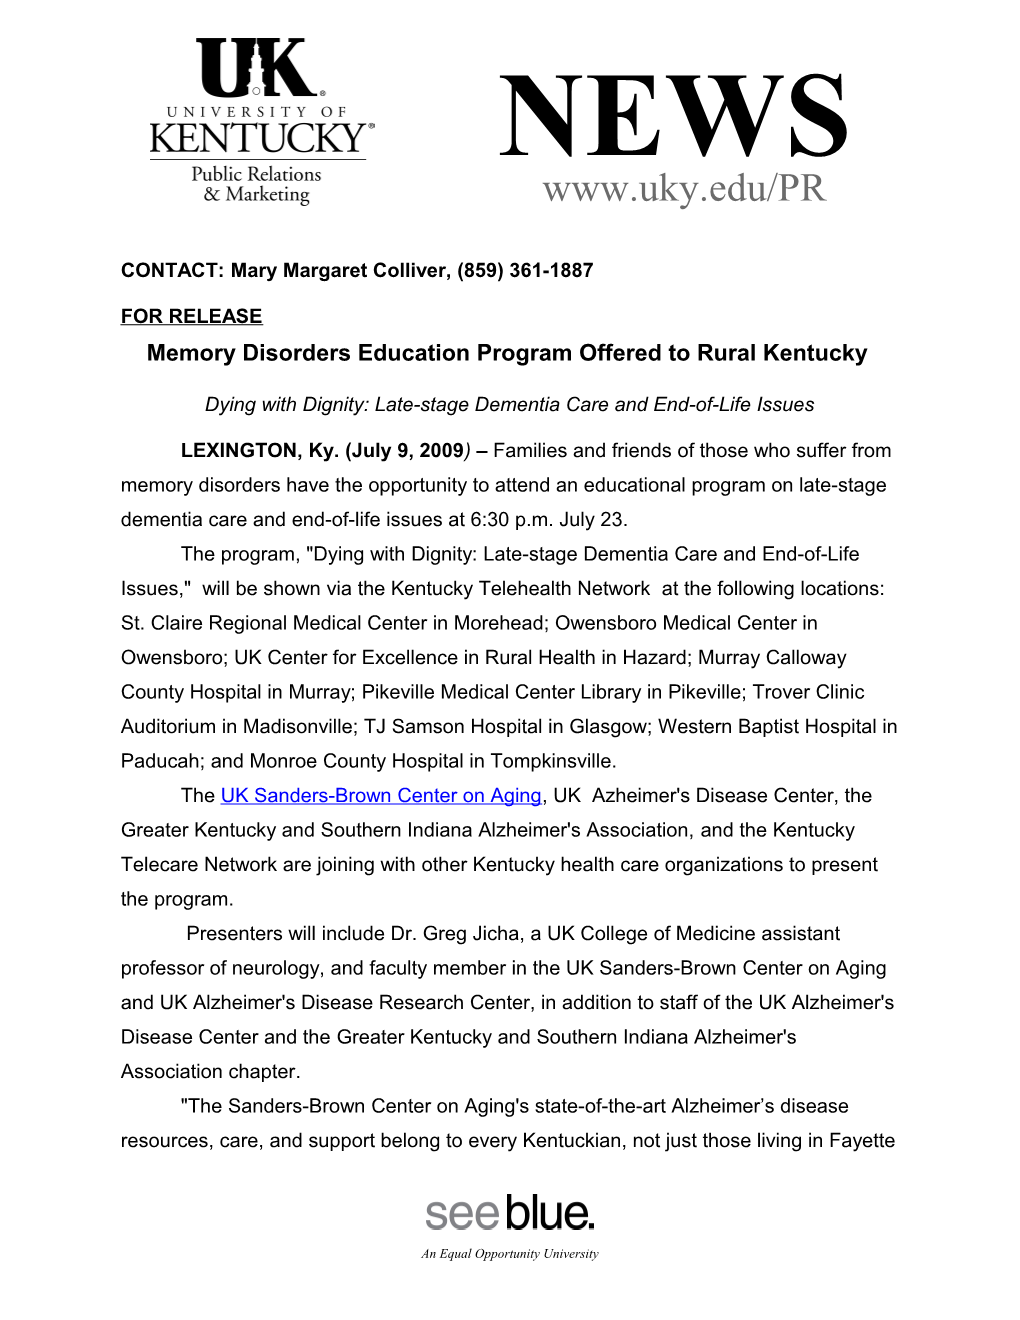 Memory Disorders Education Program Offered to Rural Kentucky